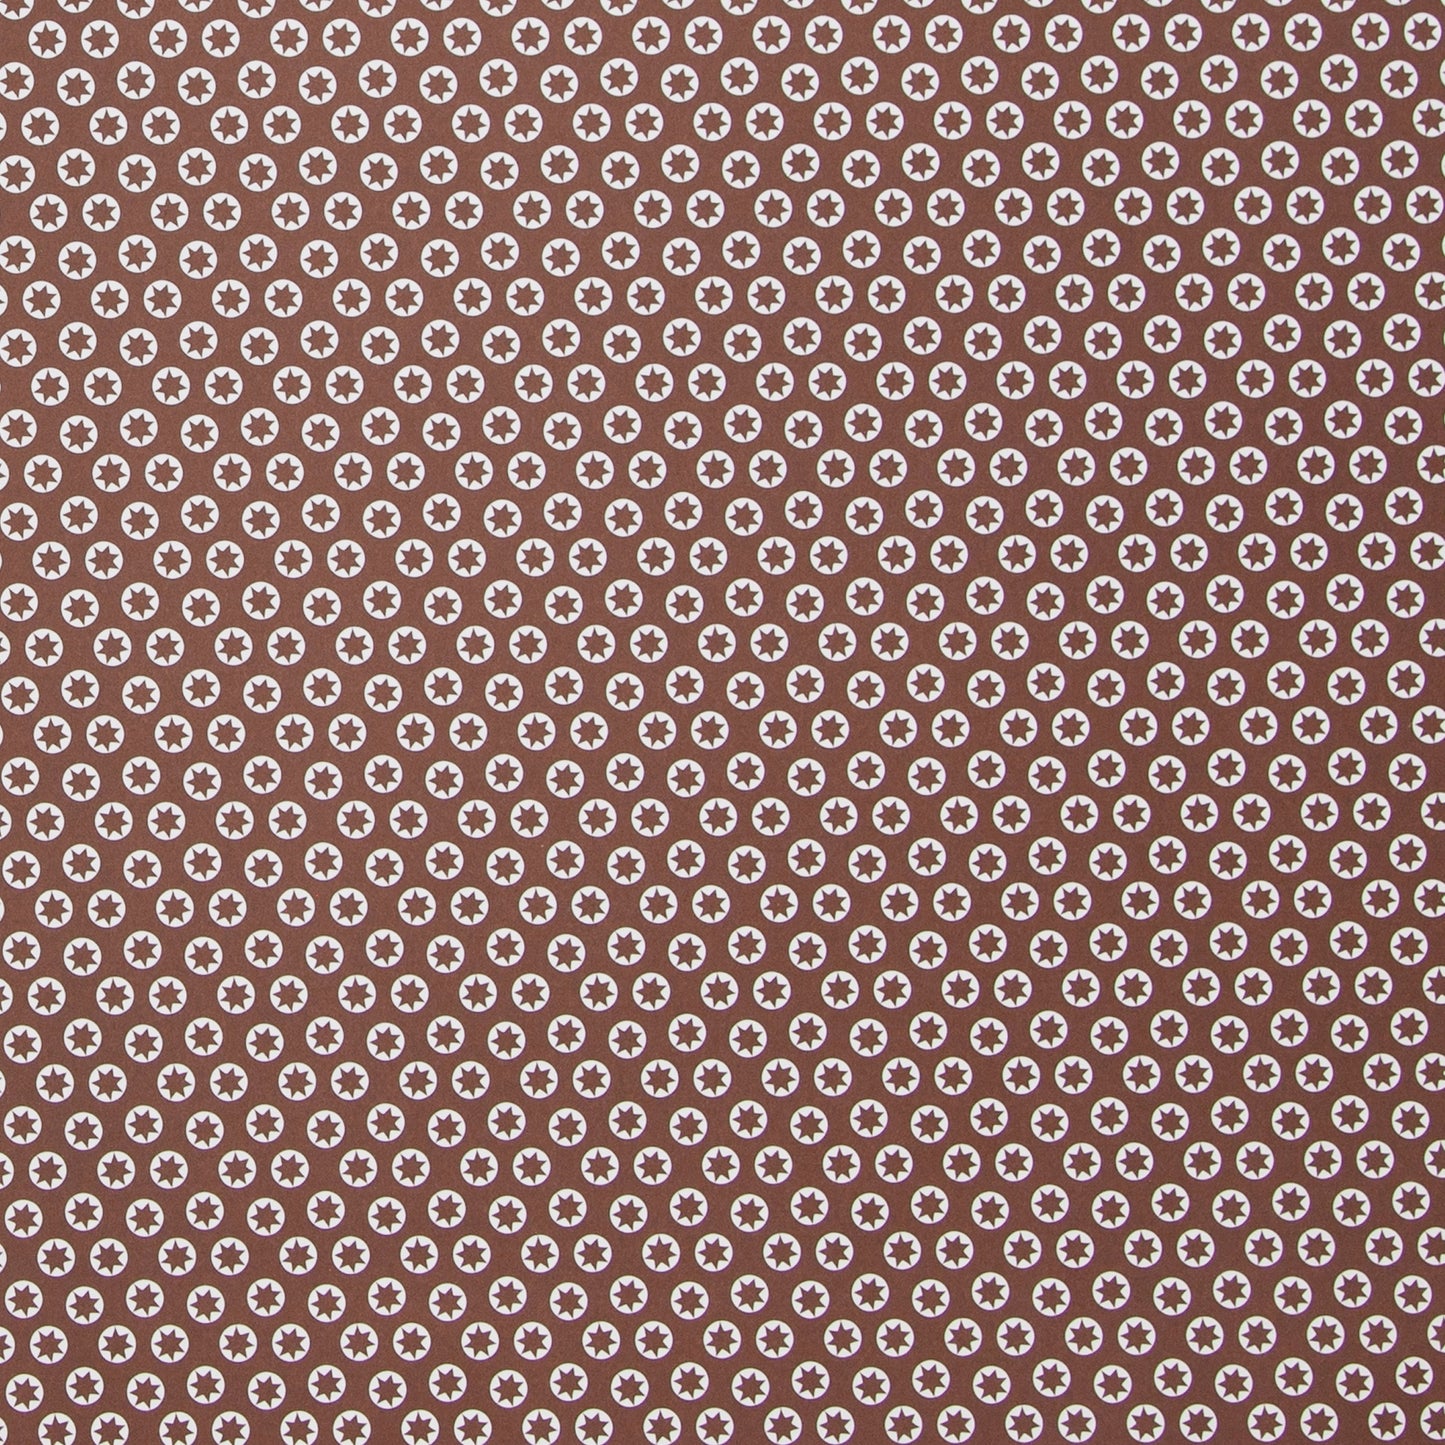 wrapping paper with an abstract tiny stars pattern in chestnut brown and white by Ola Studio